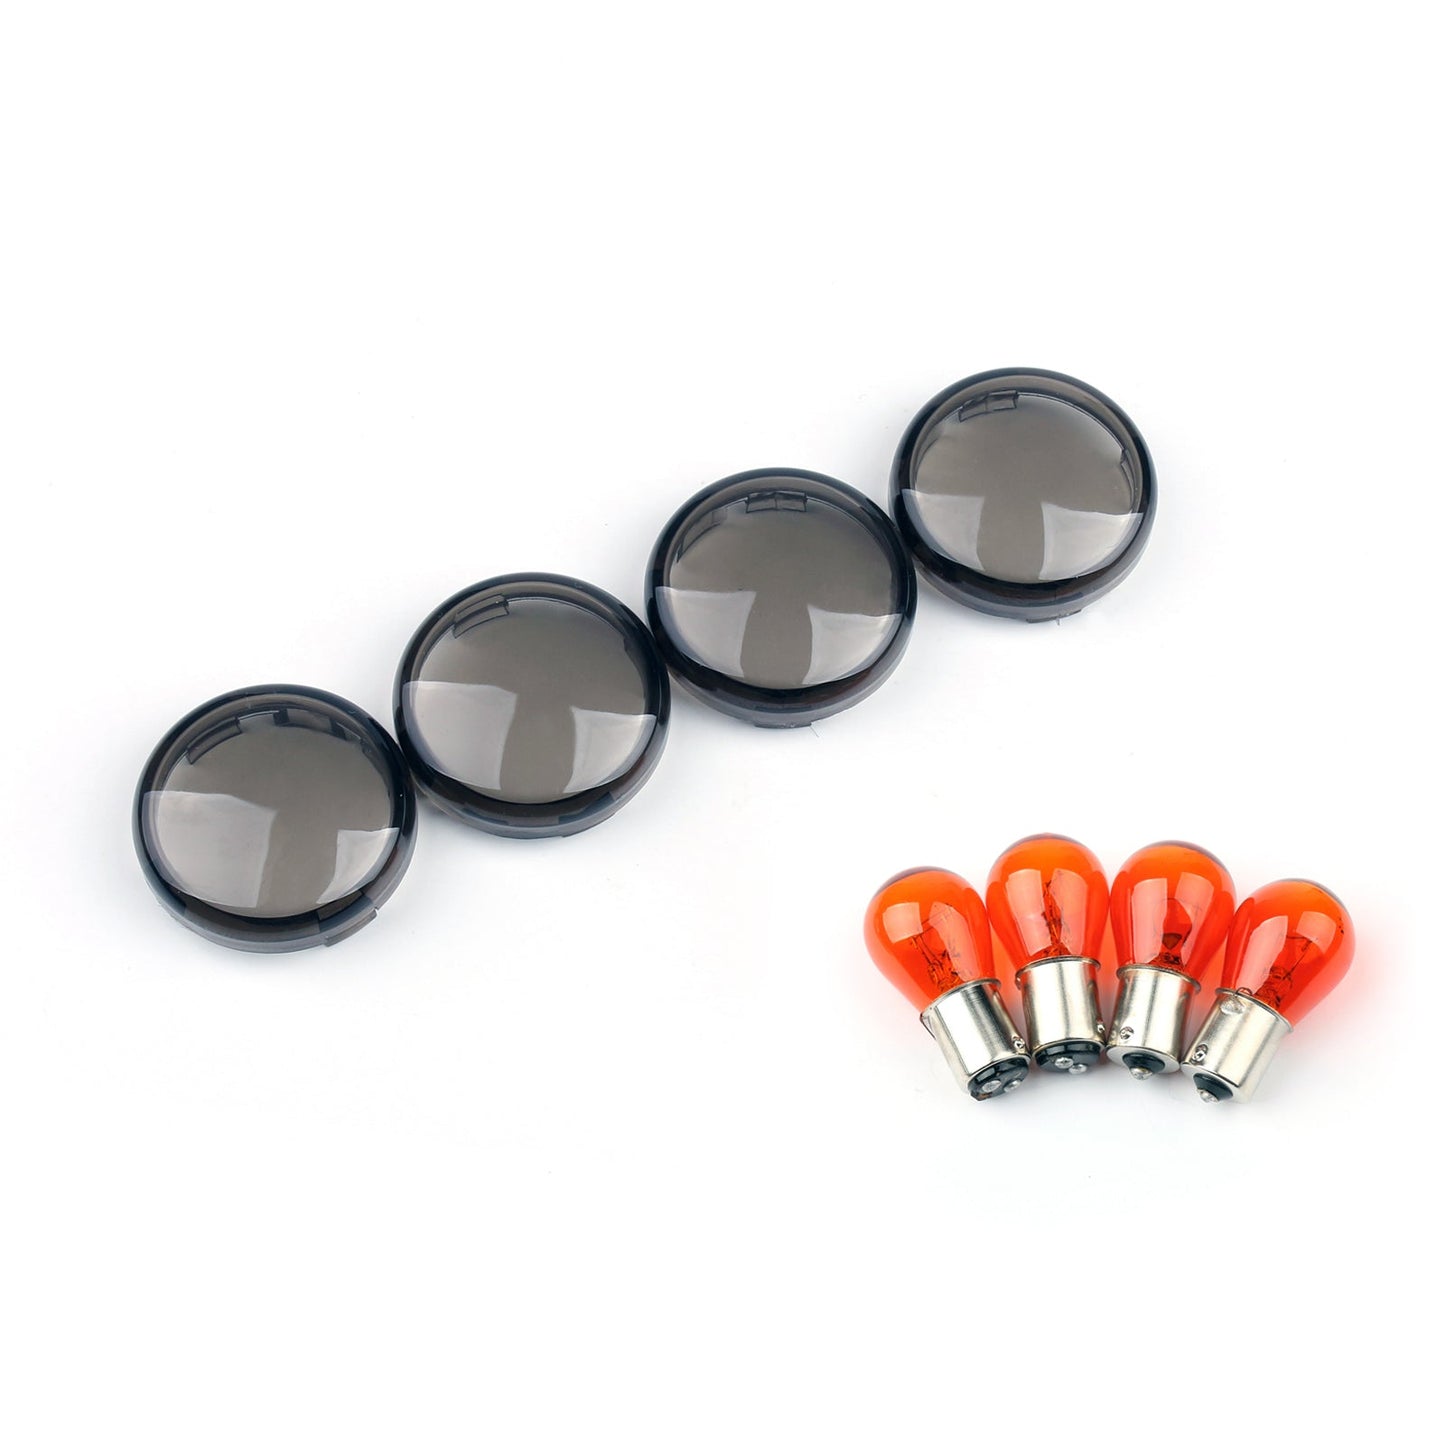 4x Clear Turn Signal Lens For Bulbs For Harley Softail Dyna Sportsters 2002 &Up